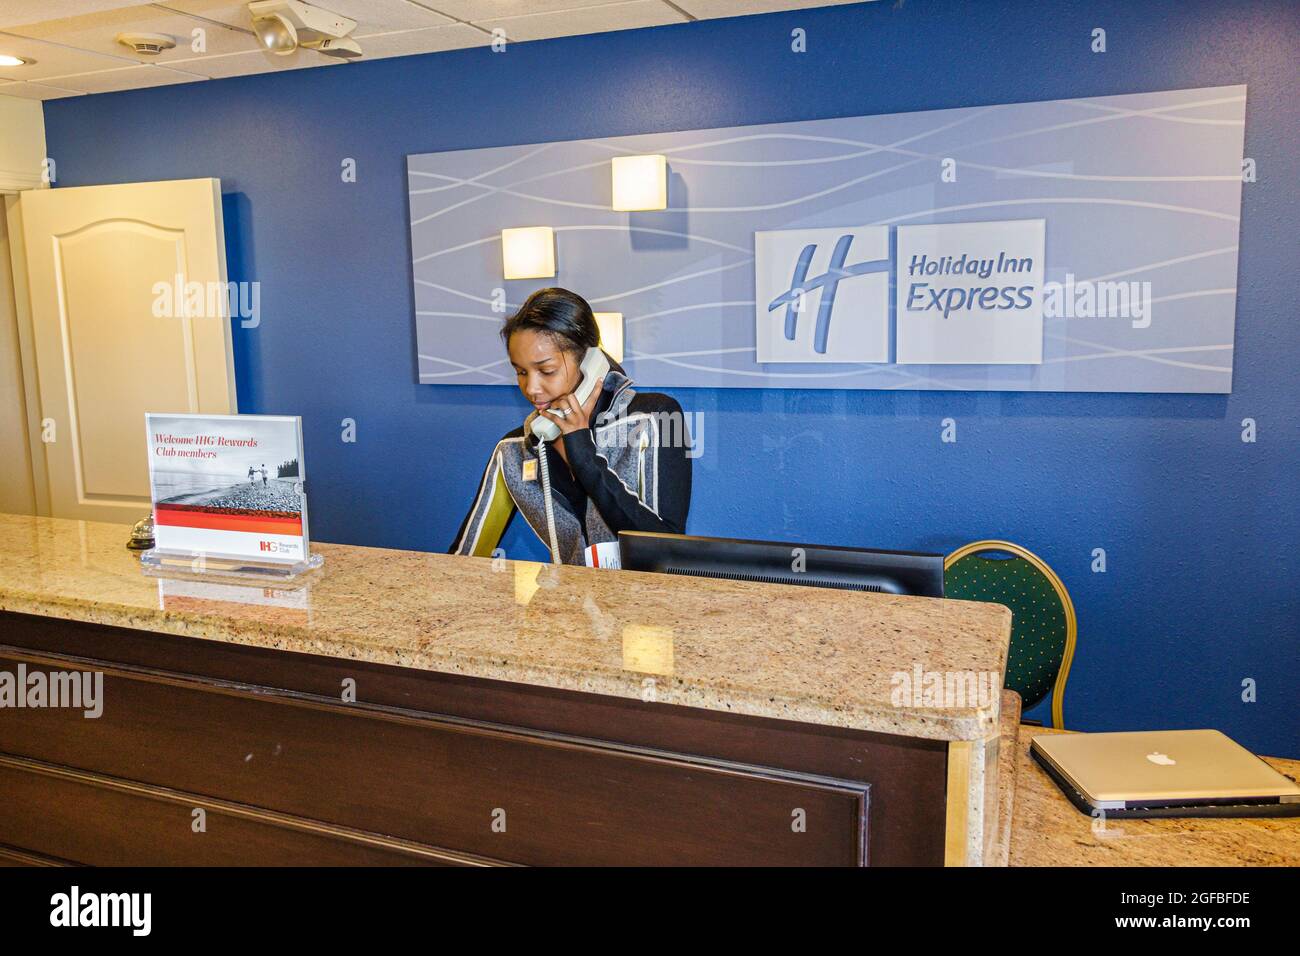 Florida Clermont Holiday Inn Express motel hotel lobby,front desk check in  reception reservations,Black woman female employee worker working staff  Stock Photo - Alamy